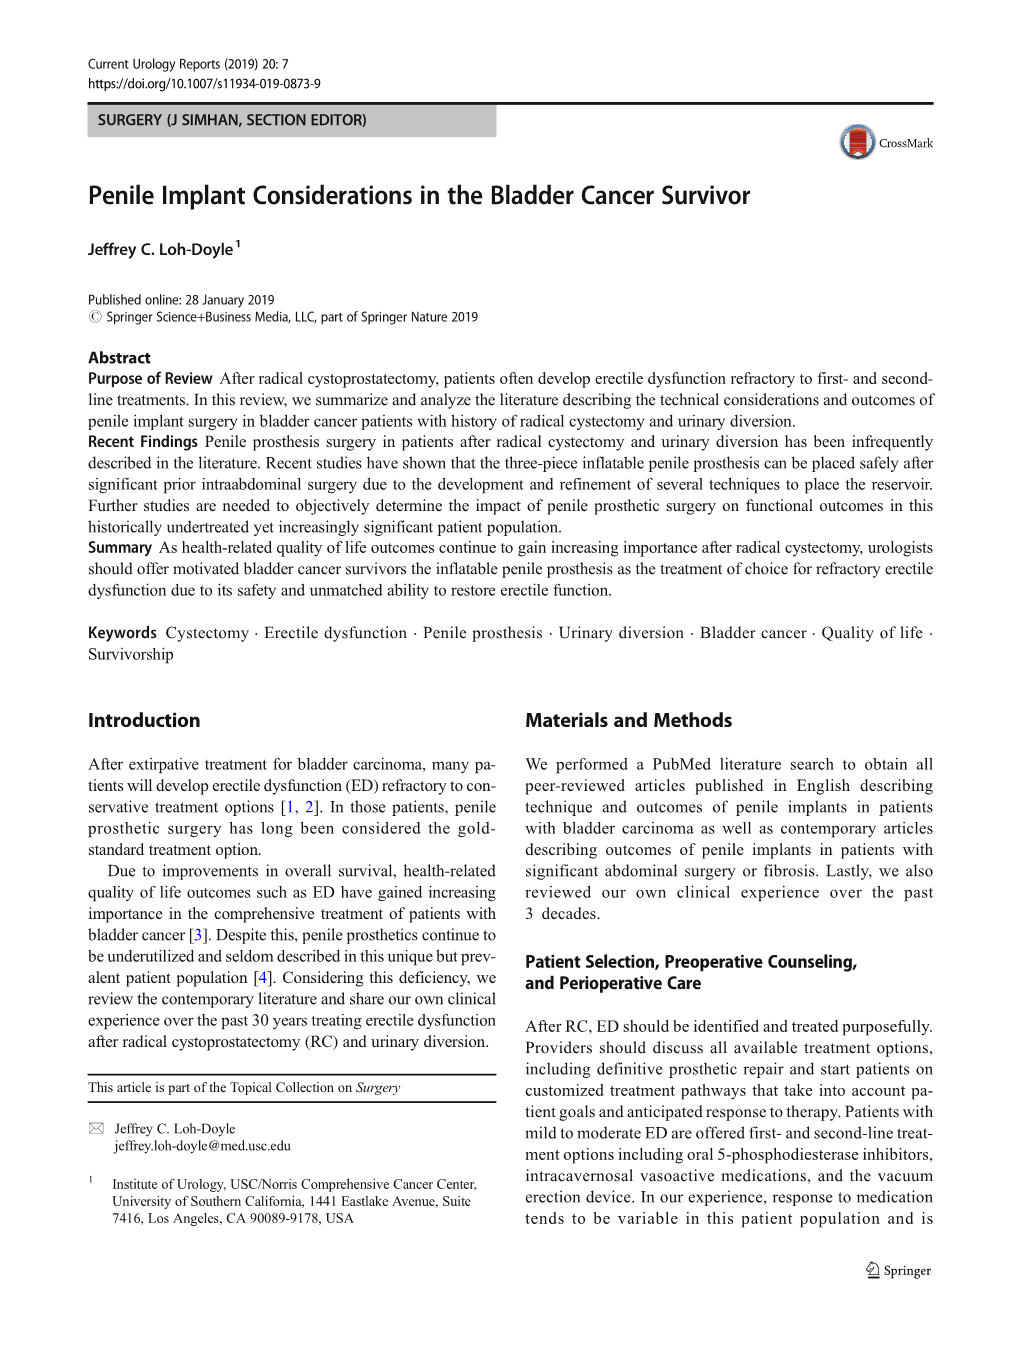 Penile Implant Considerations in the Bladder Cancer Survivor